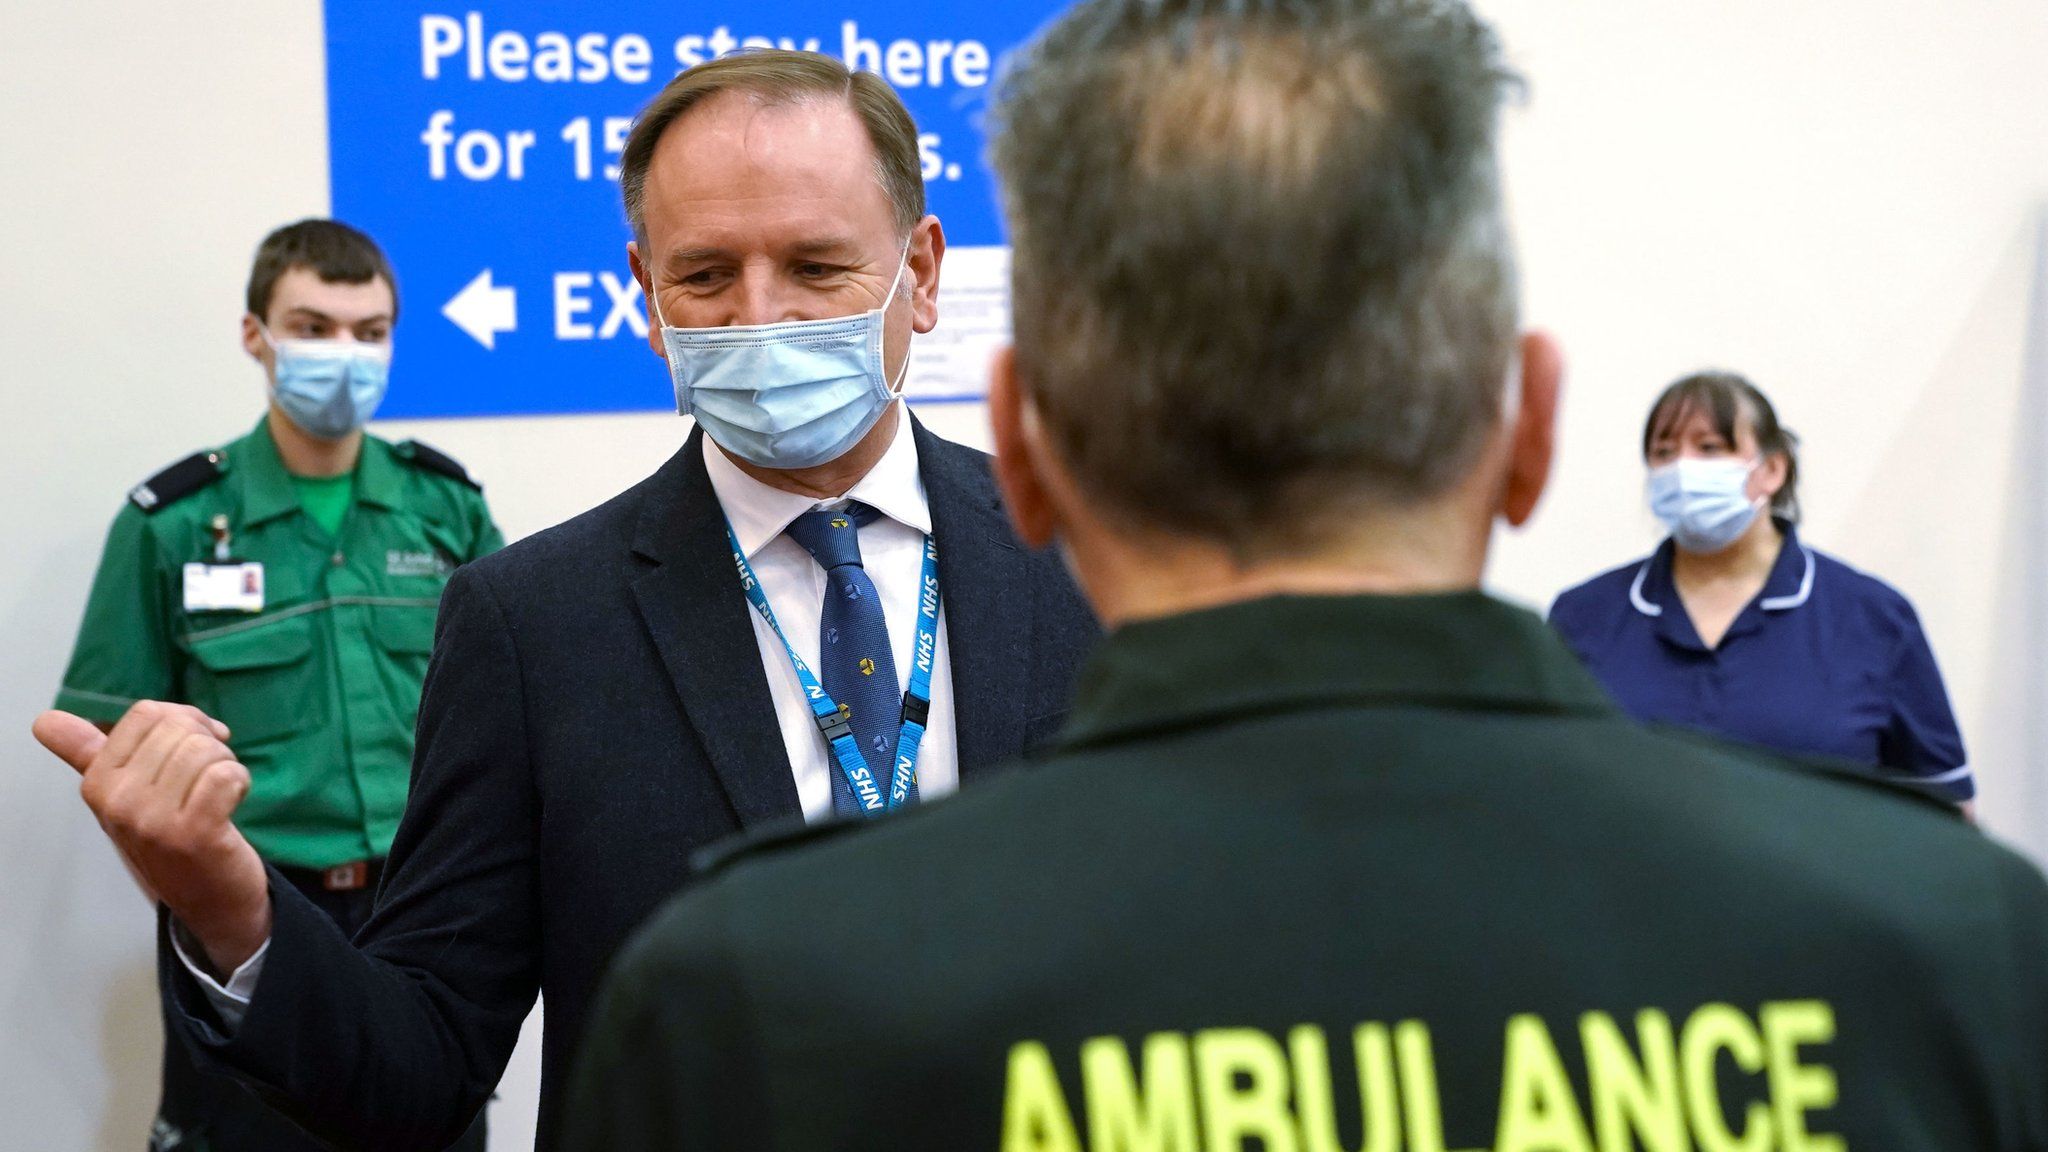 Sir Simon Stevens talks to a member of the vaccine team during a visit to the Centre for Life in Newcastle